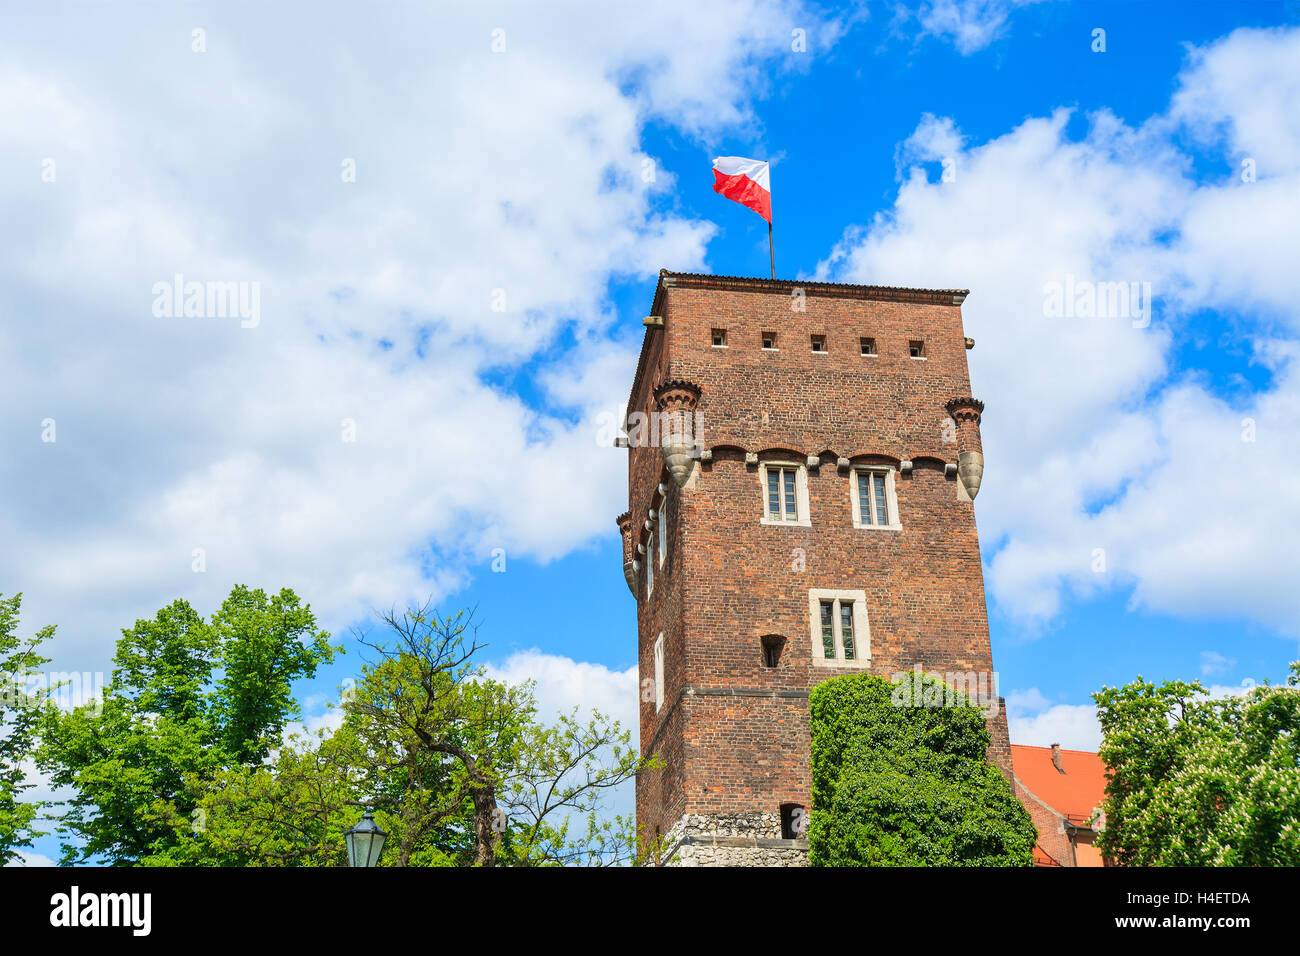 White and red Polish flag on top of Wawel castle tower in Krakow, Poland Stock Photo